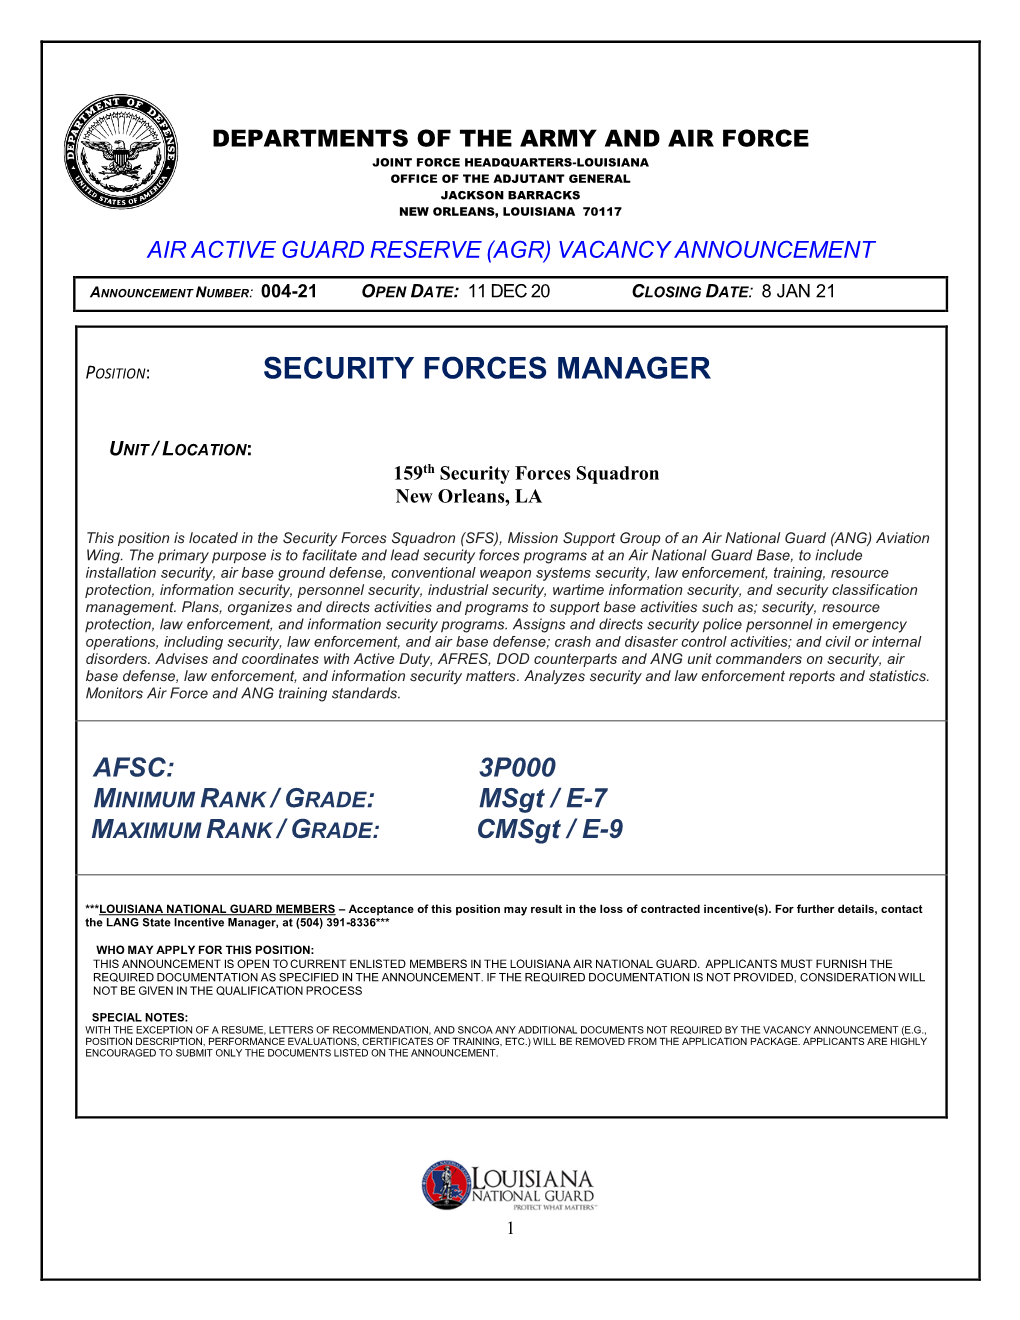 Security Forces Manager